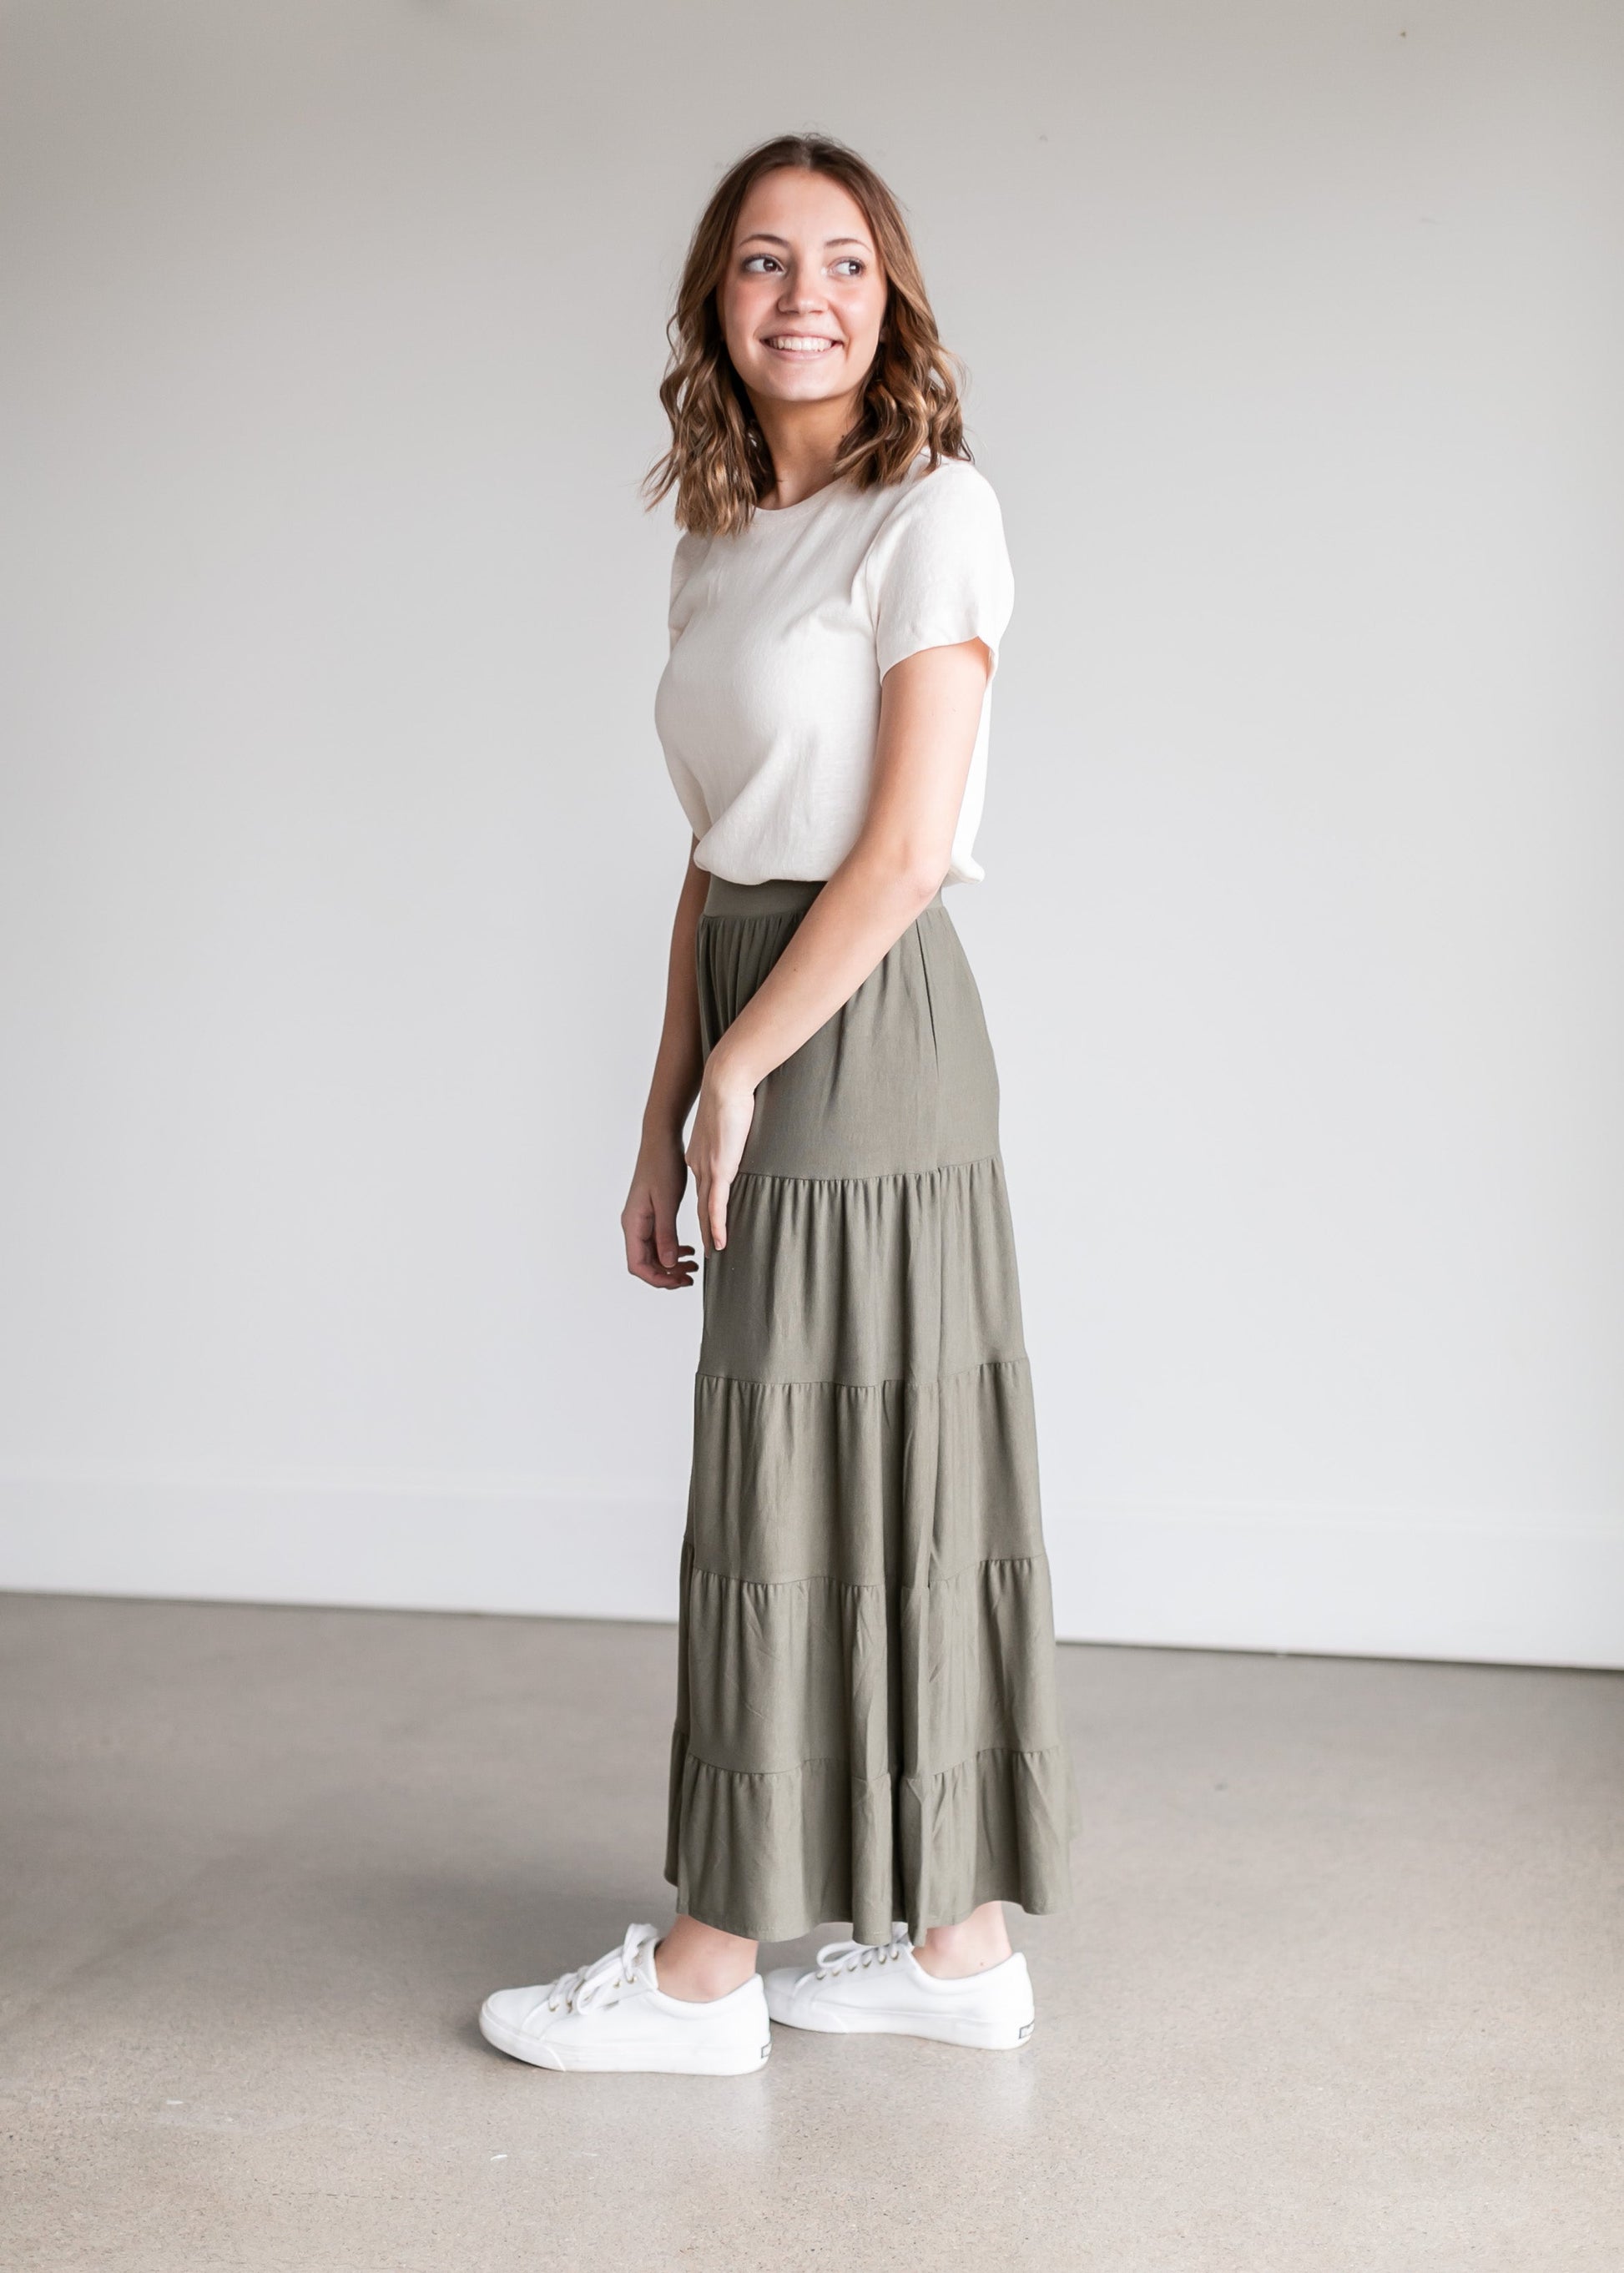 Pull-On Stretch Waist Tiered Maxi Skirt - FINAL SALE FF Skirts